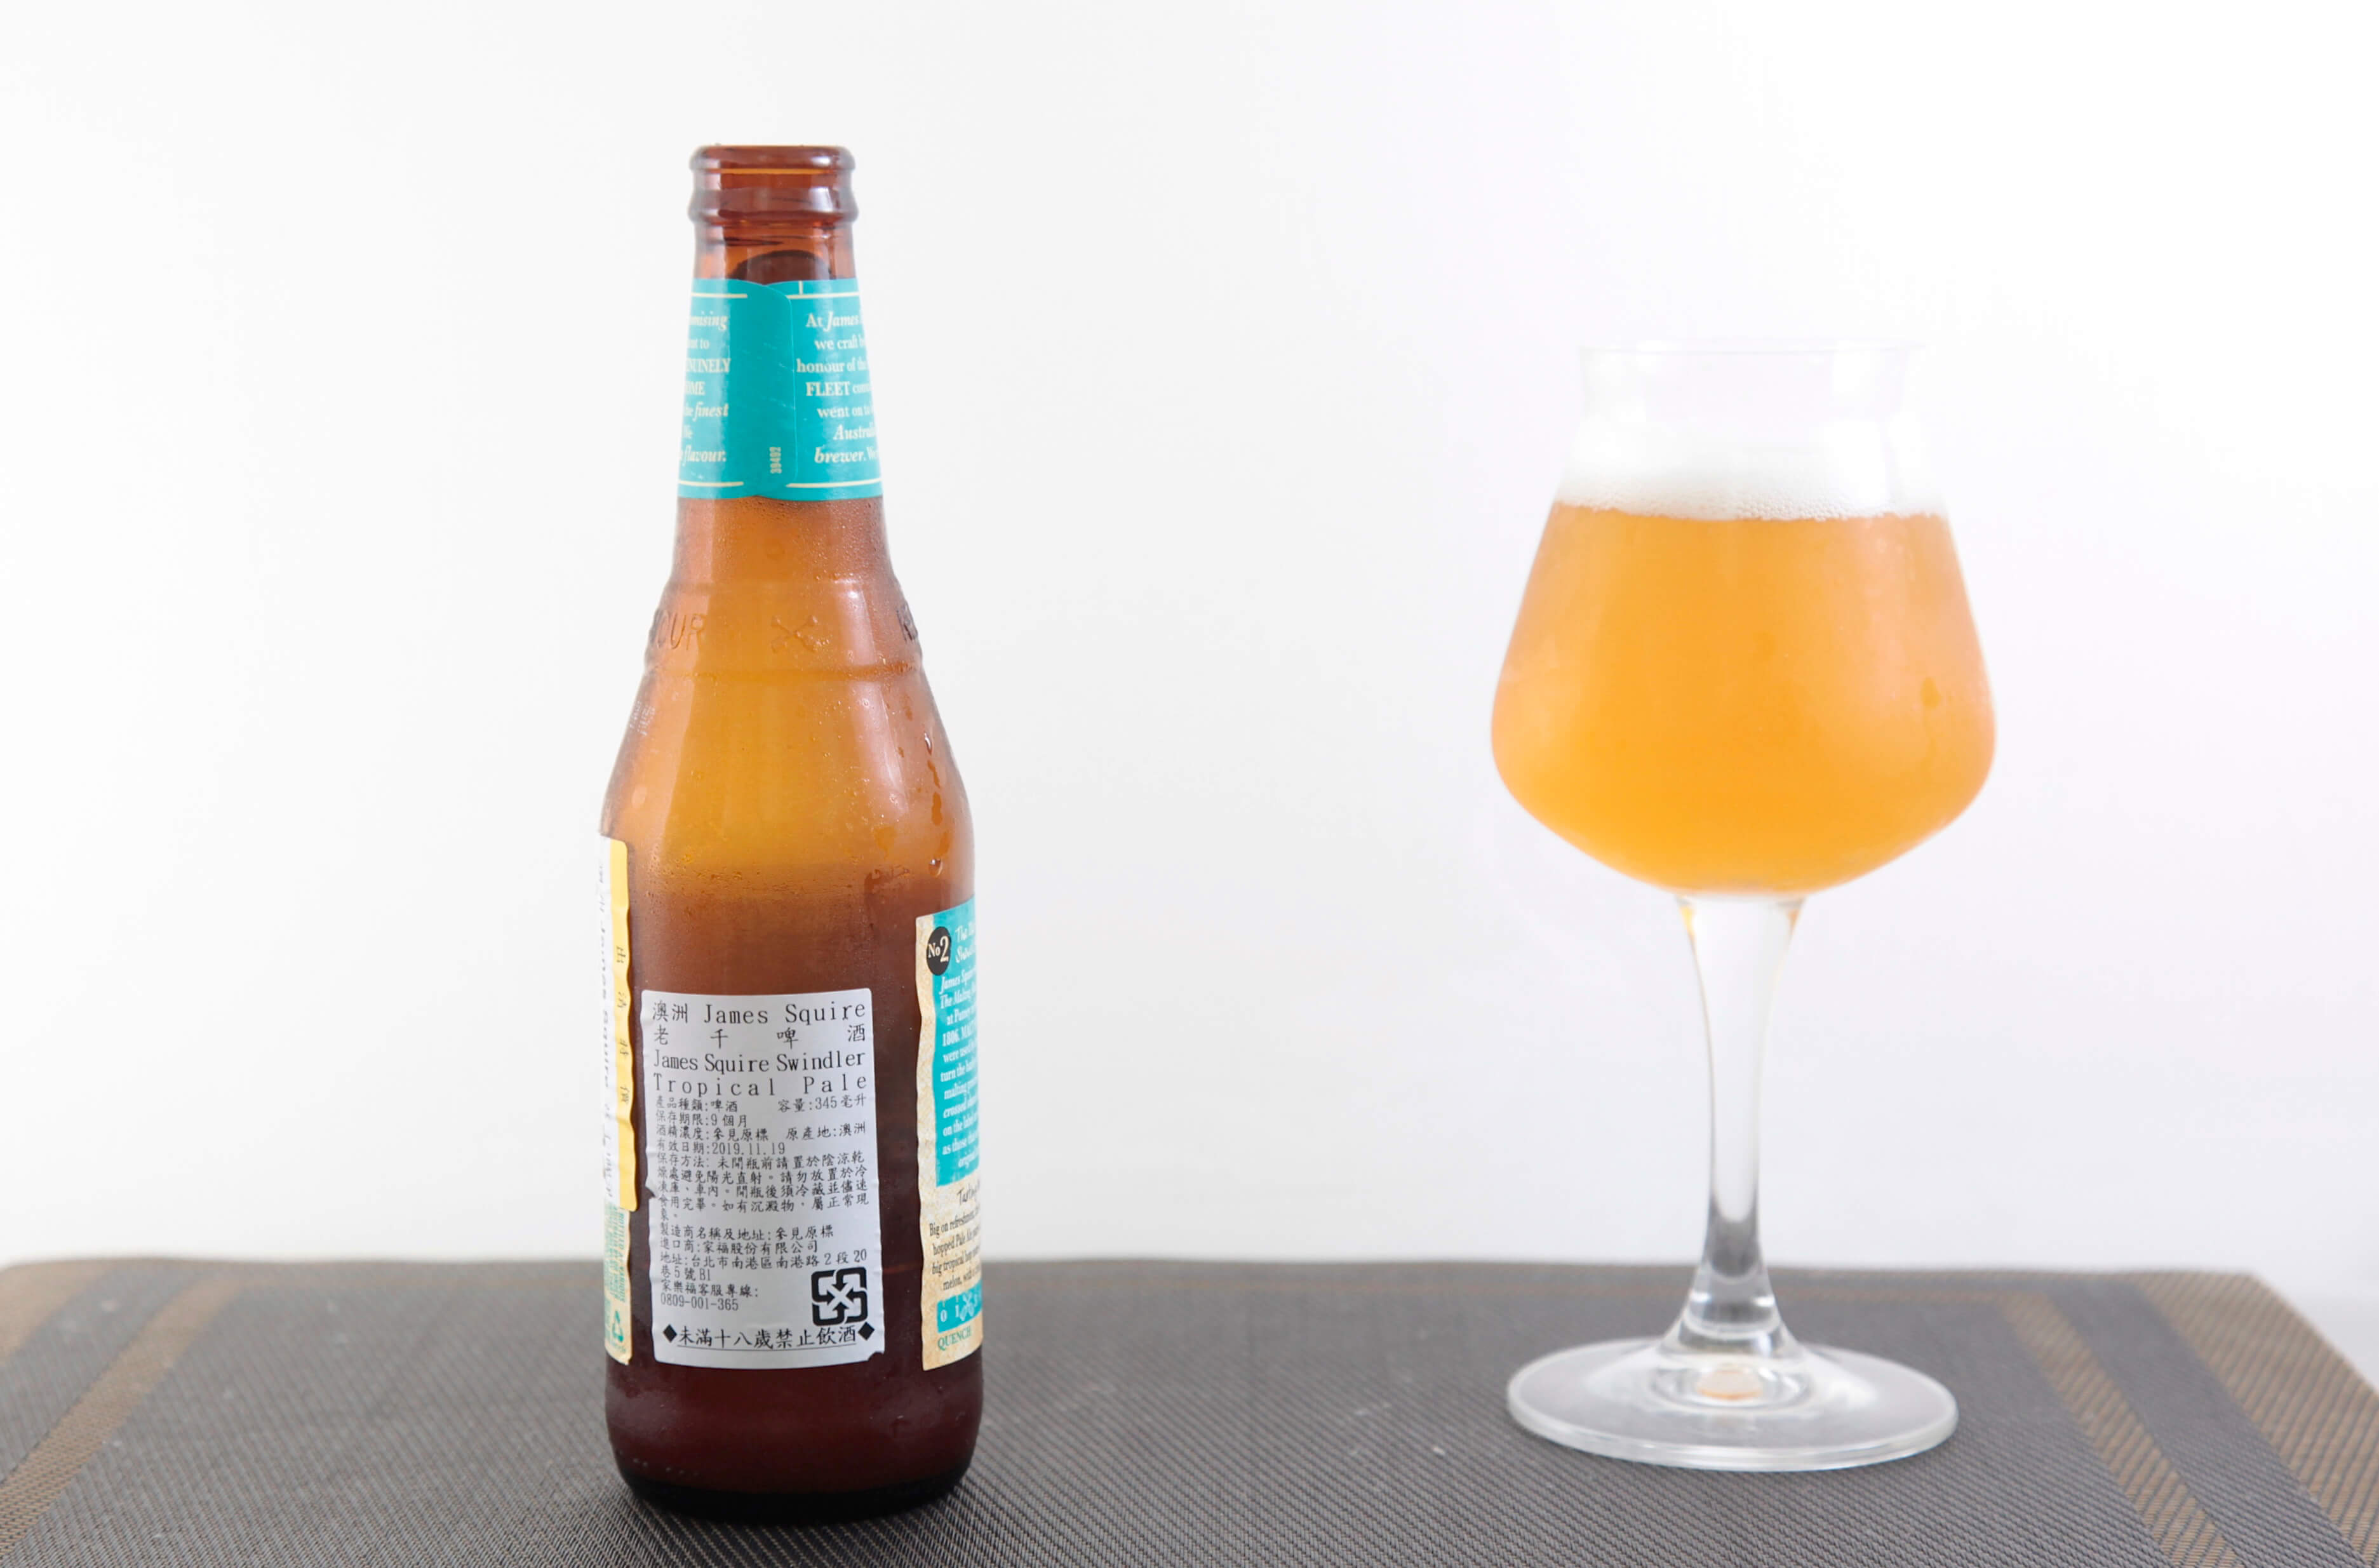 James Squire | The Swindler Tropical Ale 老千啤酒